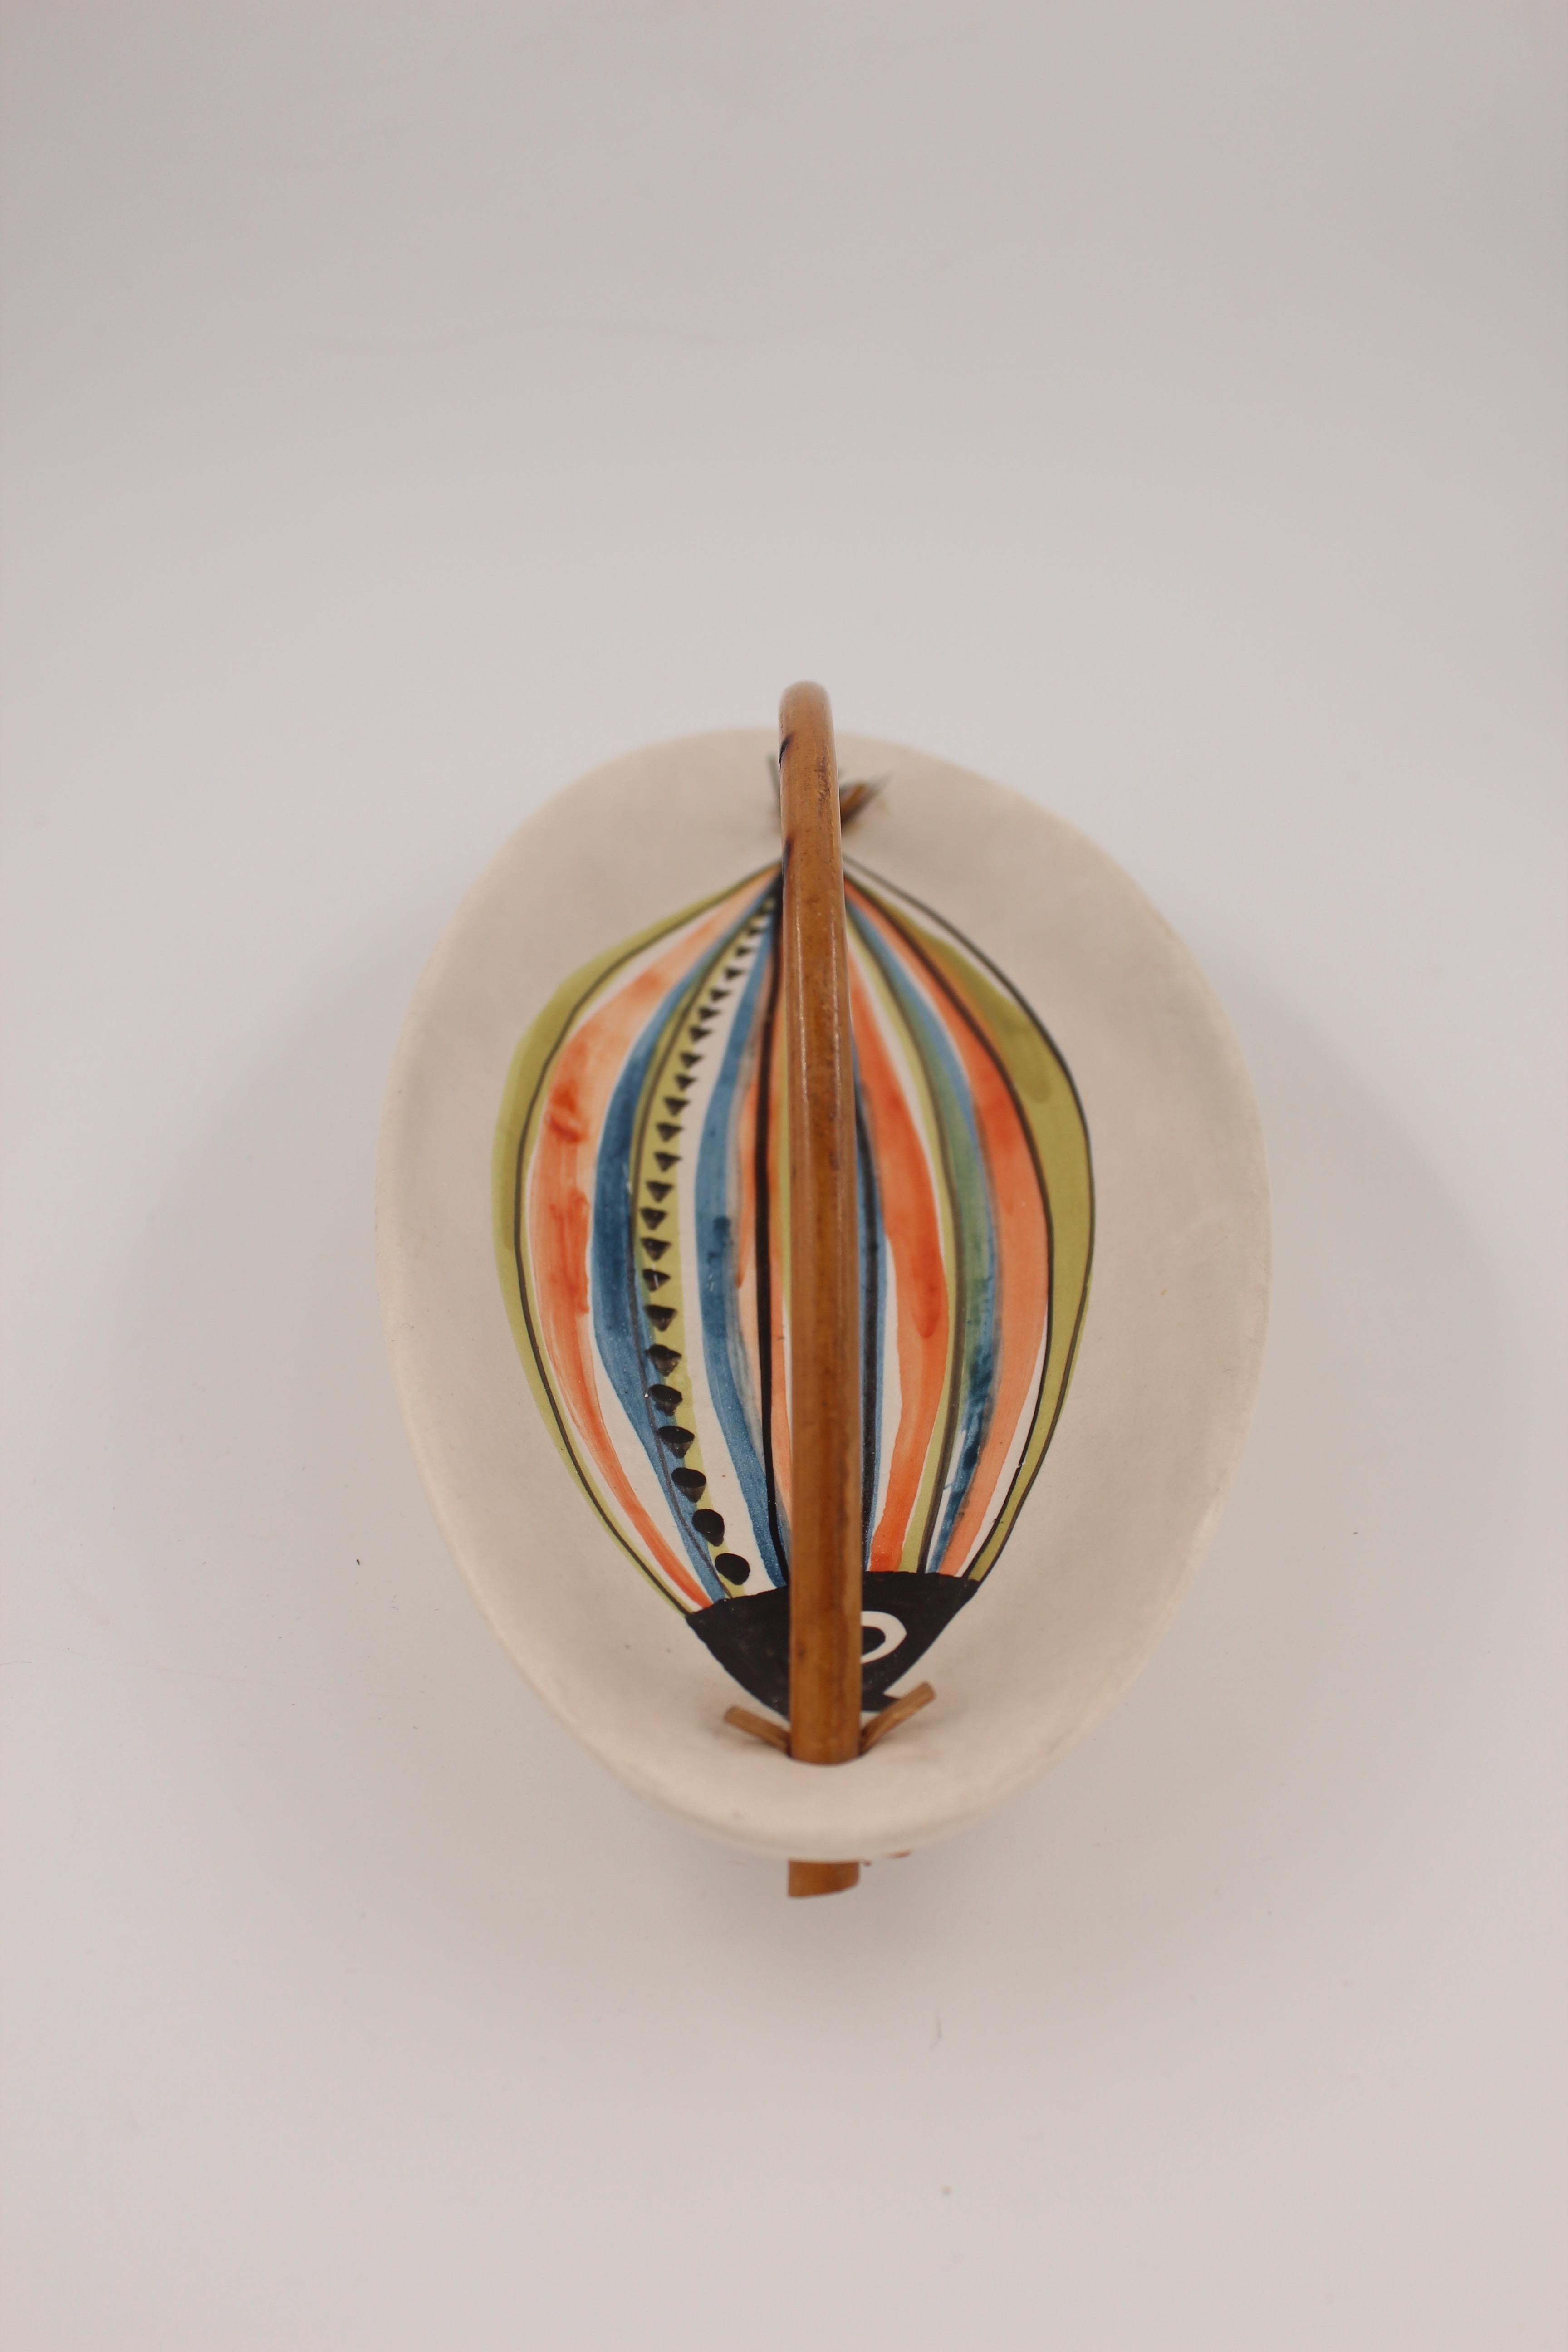 French Large Roger Capron Decorative Dish with Bamboo Handle, Vallauris, France, 1950s